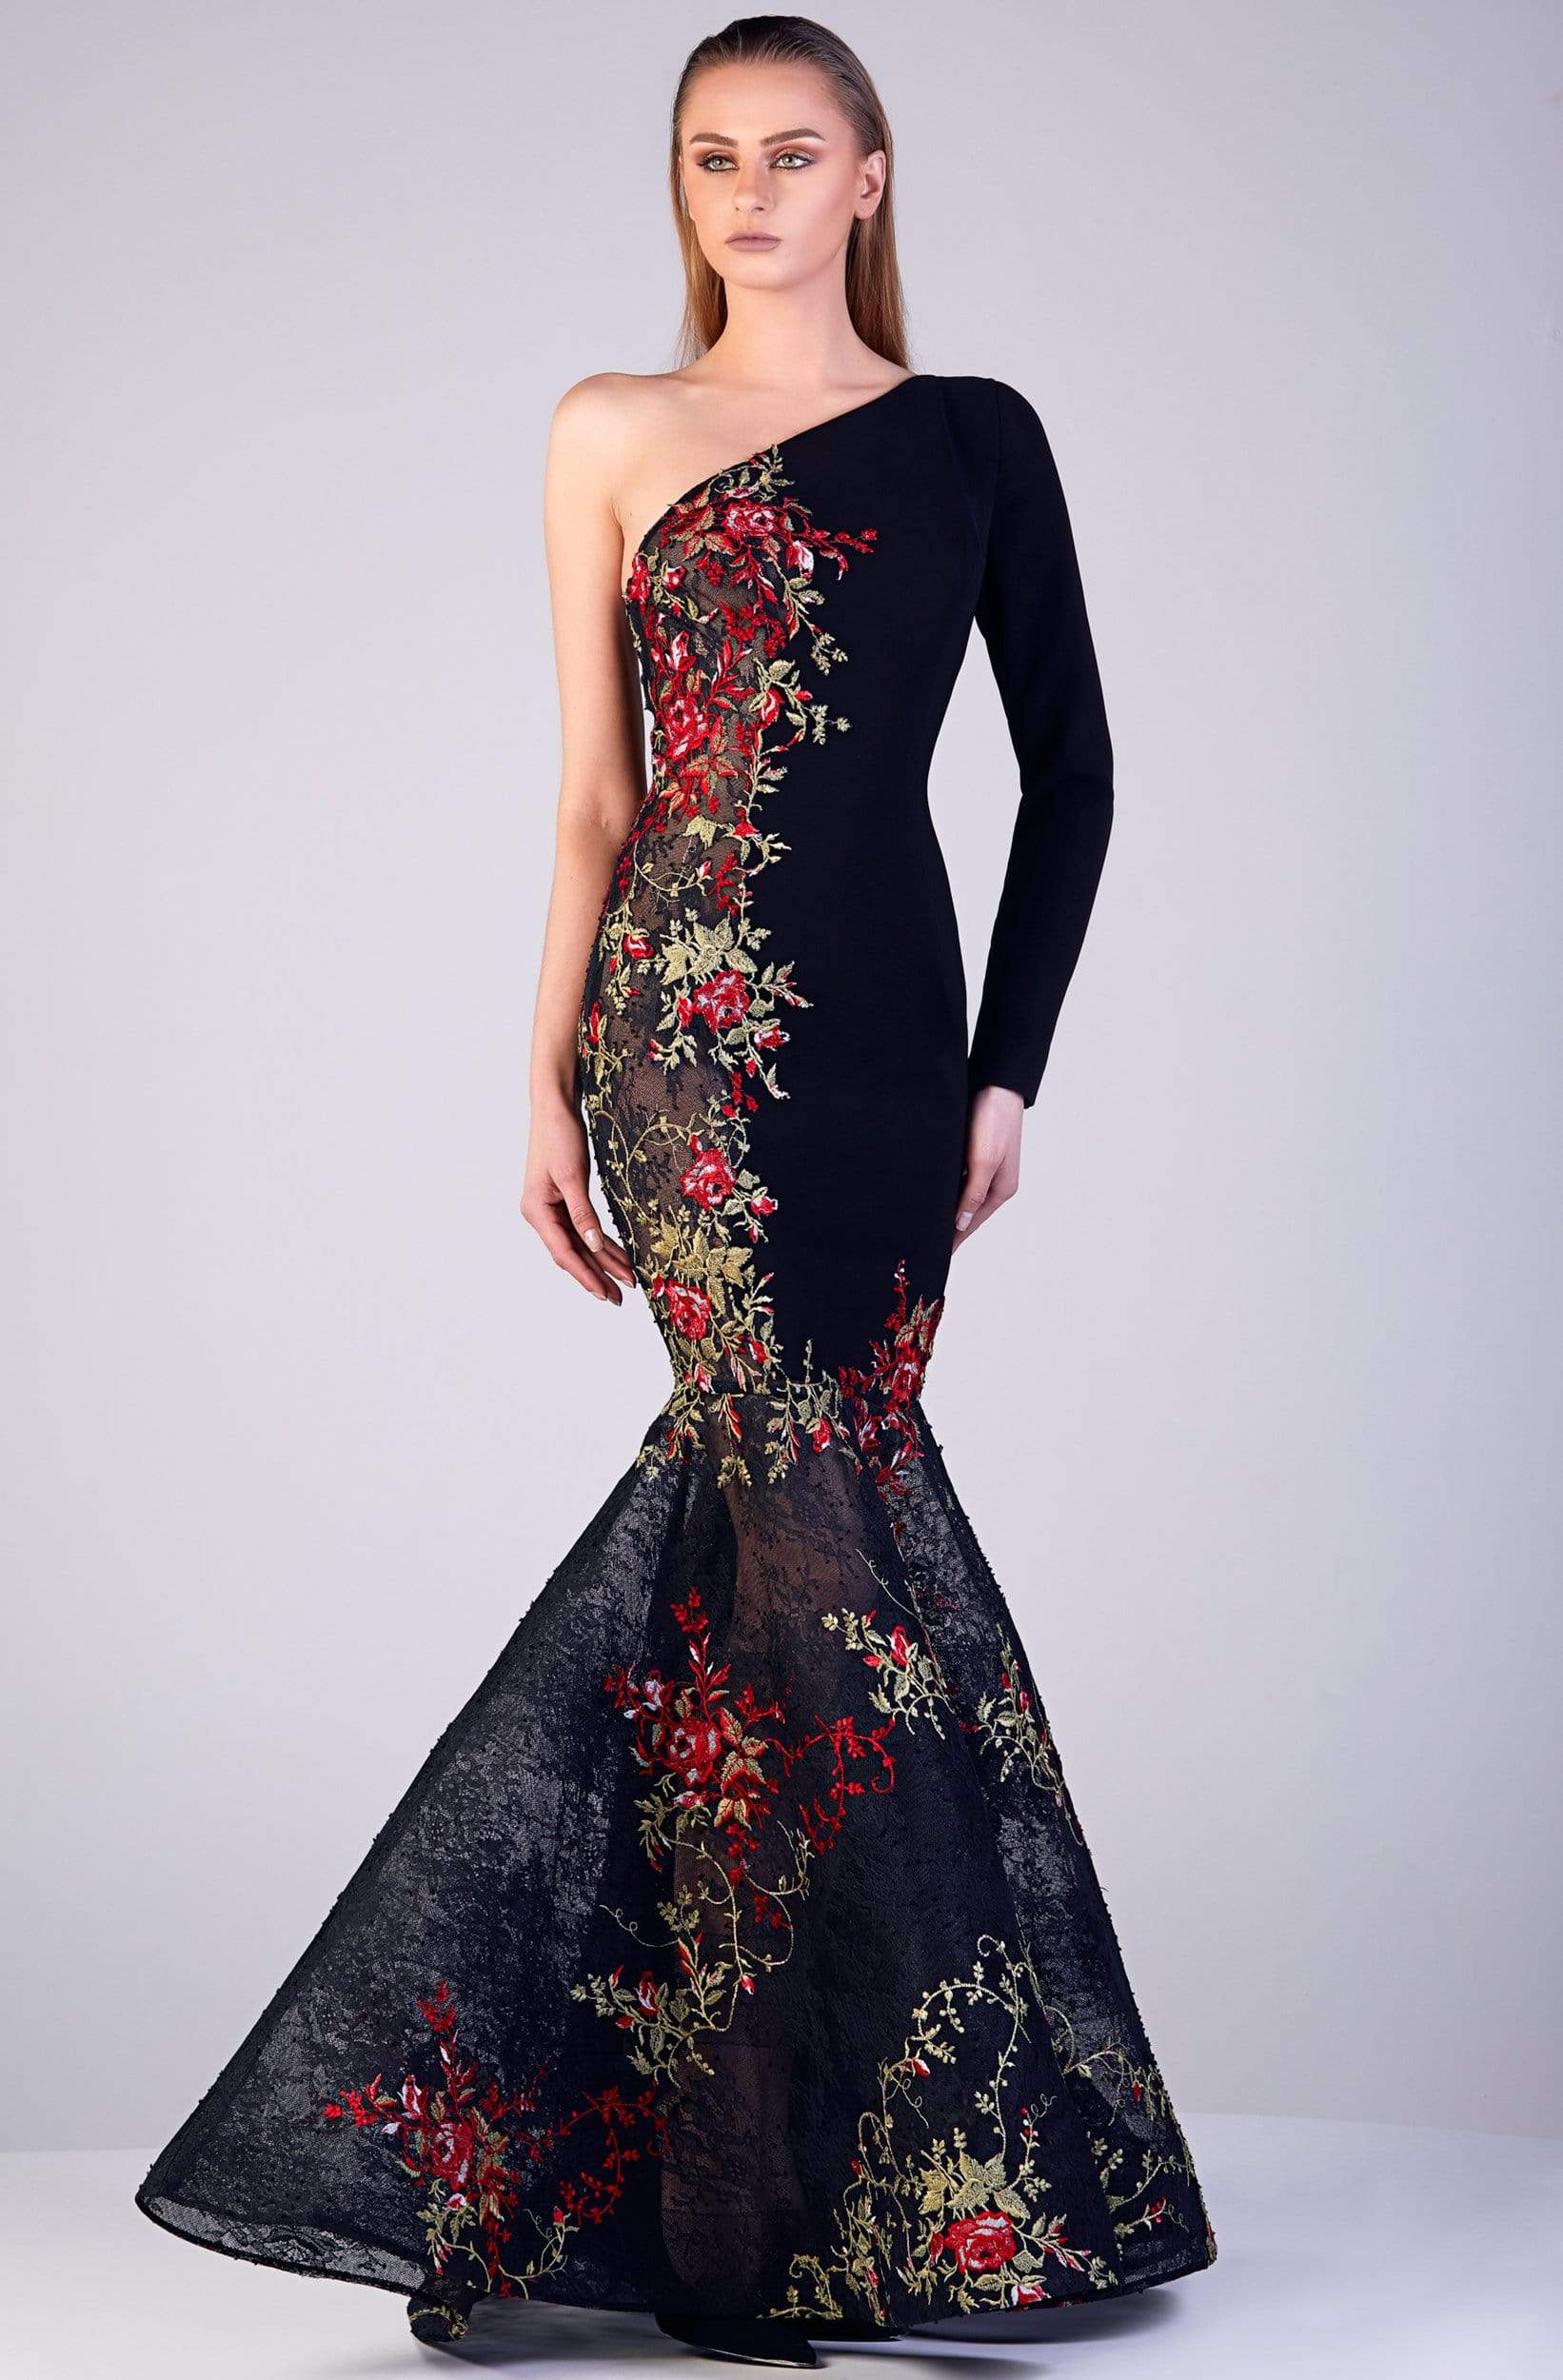 Gatti Nolli Couture - OP-5177 Floral Embroidered Asymmetrical Gown
